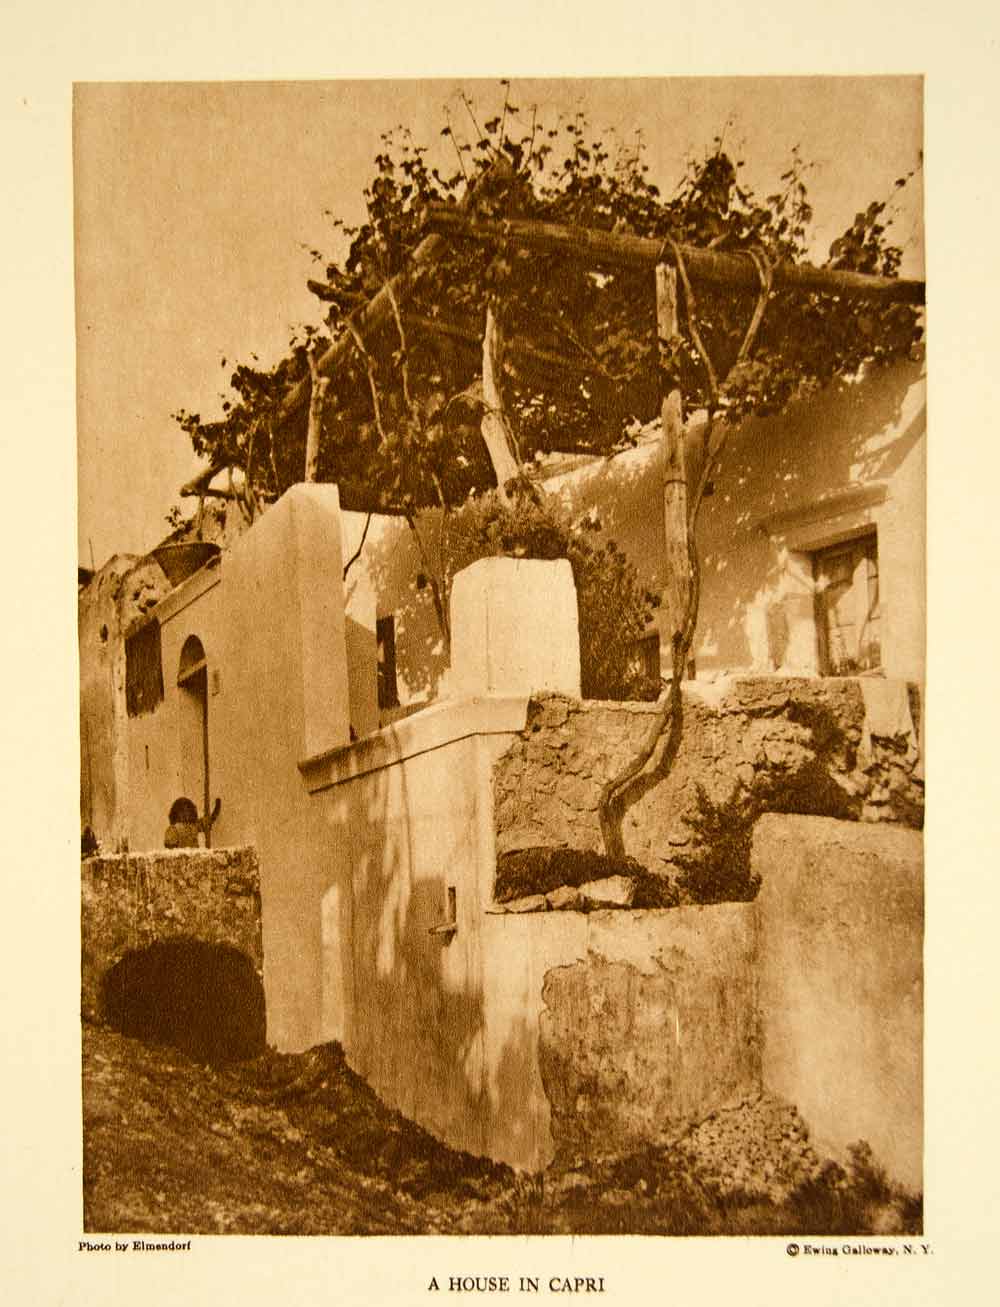 1924 Photogravure Capril Island Italy House Home Architecture Building YTMM4